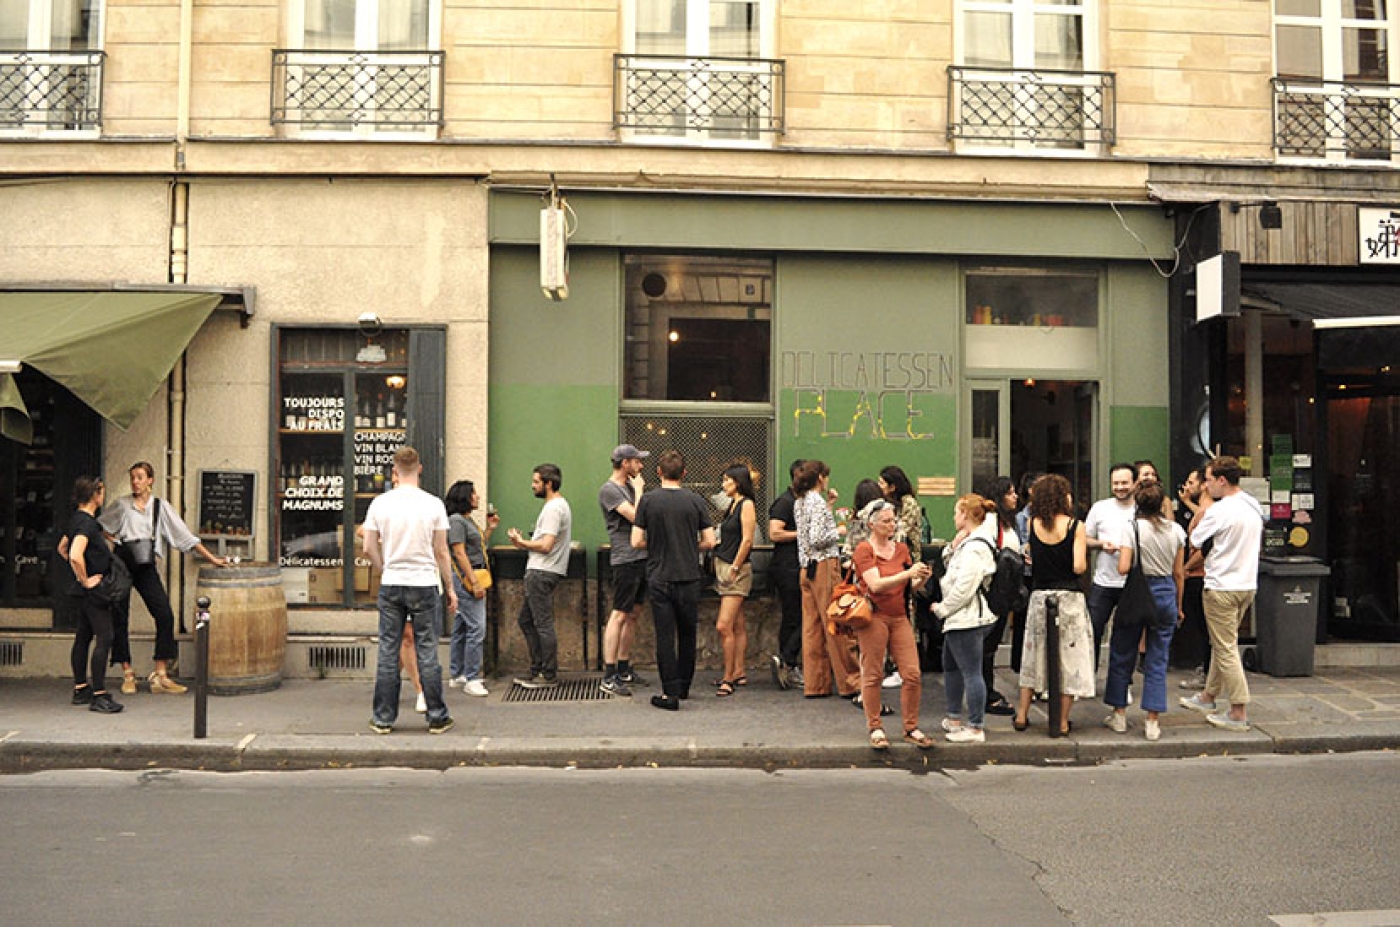 Crowd of people standing and drinking wine outside a wine bar in Paris.